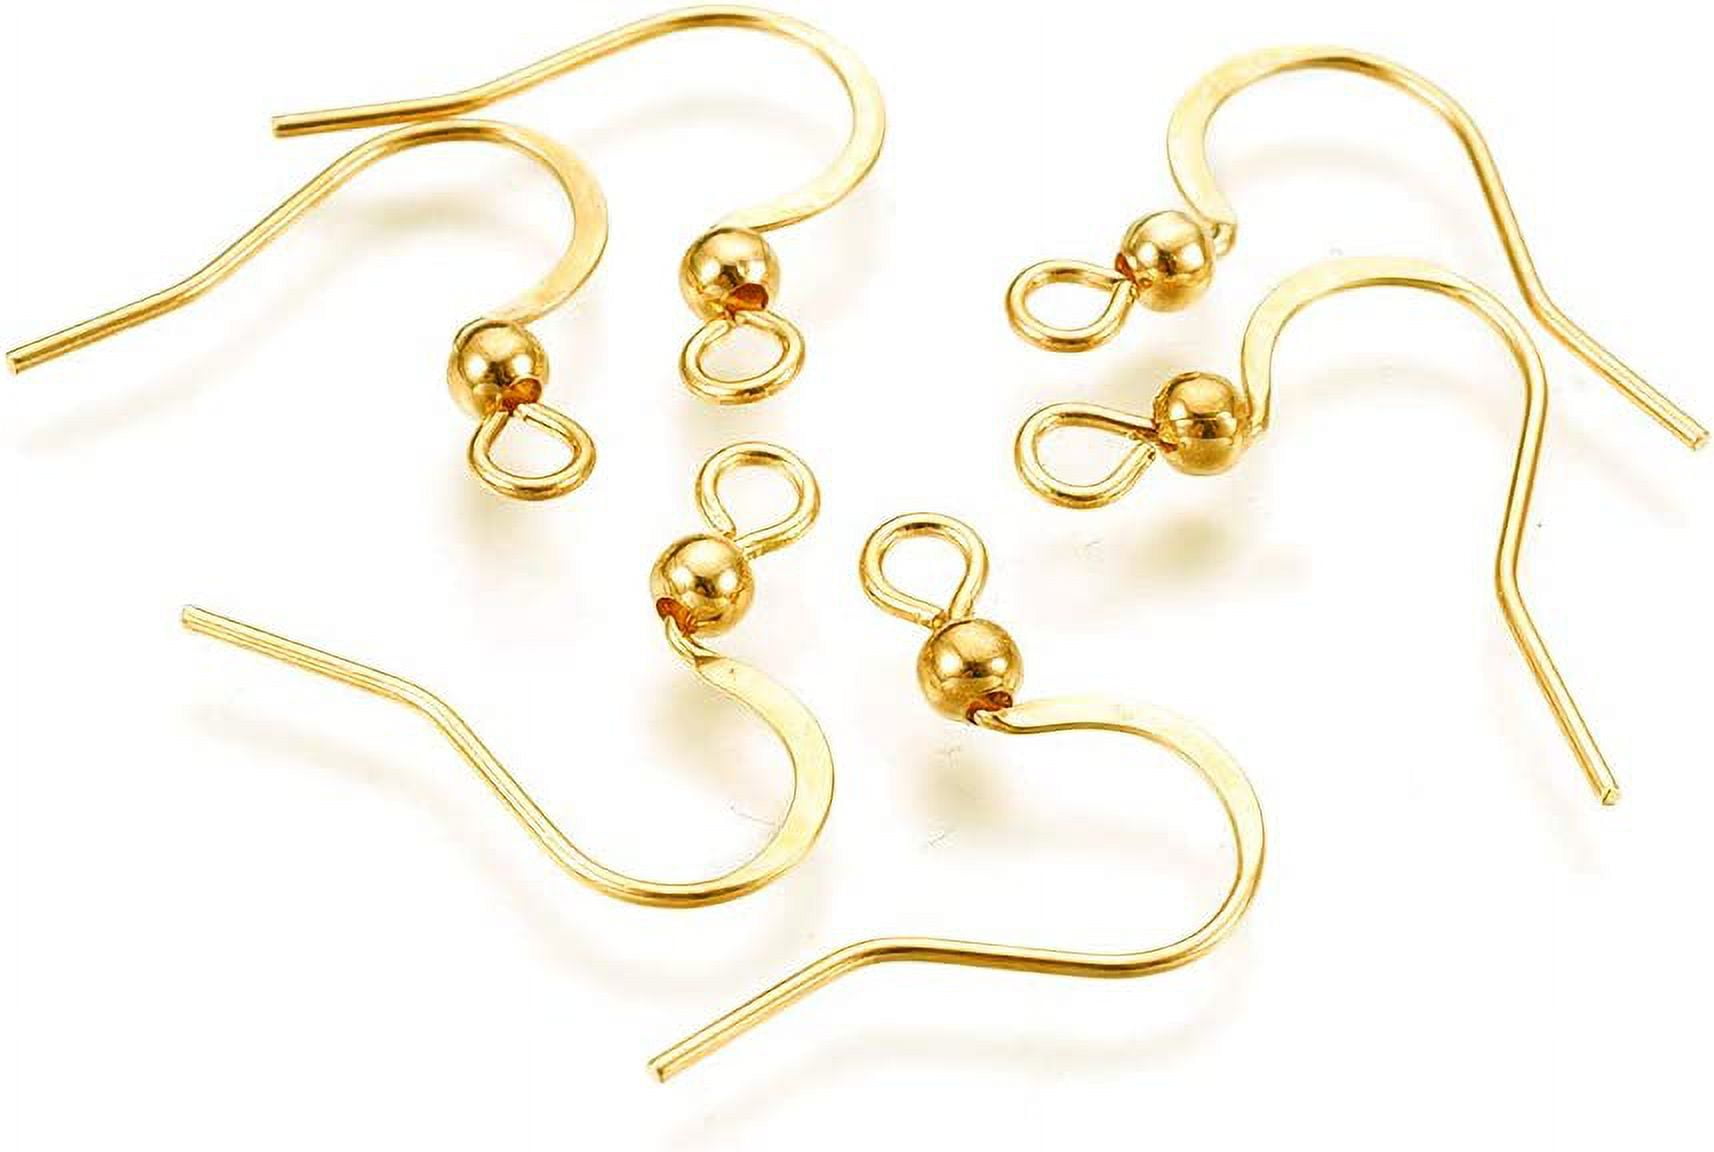 200pcs Stainless Steel French Earring Hooks Fish Hook Ear Wires with Ball  for Jewelry Making (Gold,16x19.5mm) 